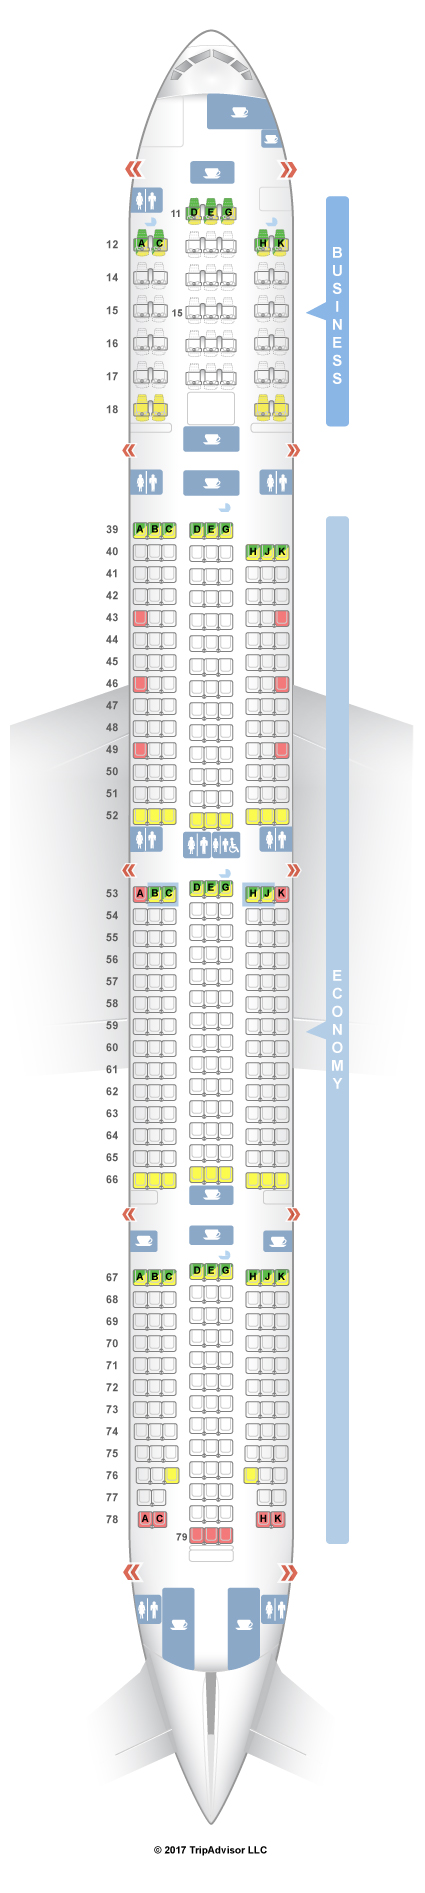 Seating Chart For Cathay Pacific Boeing 777 300er